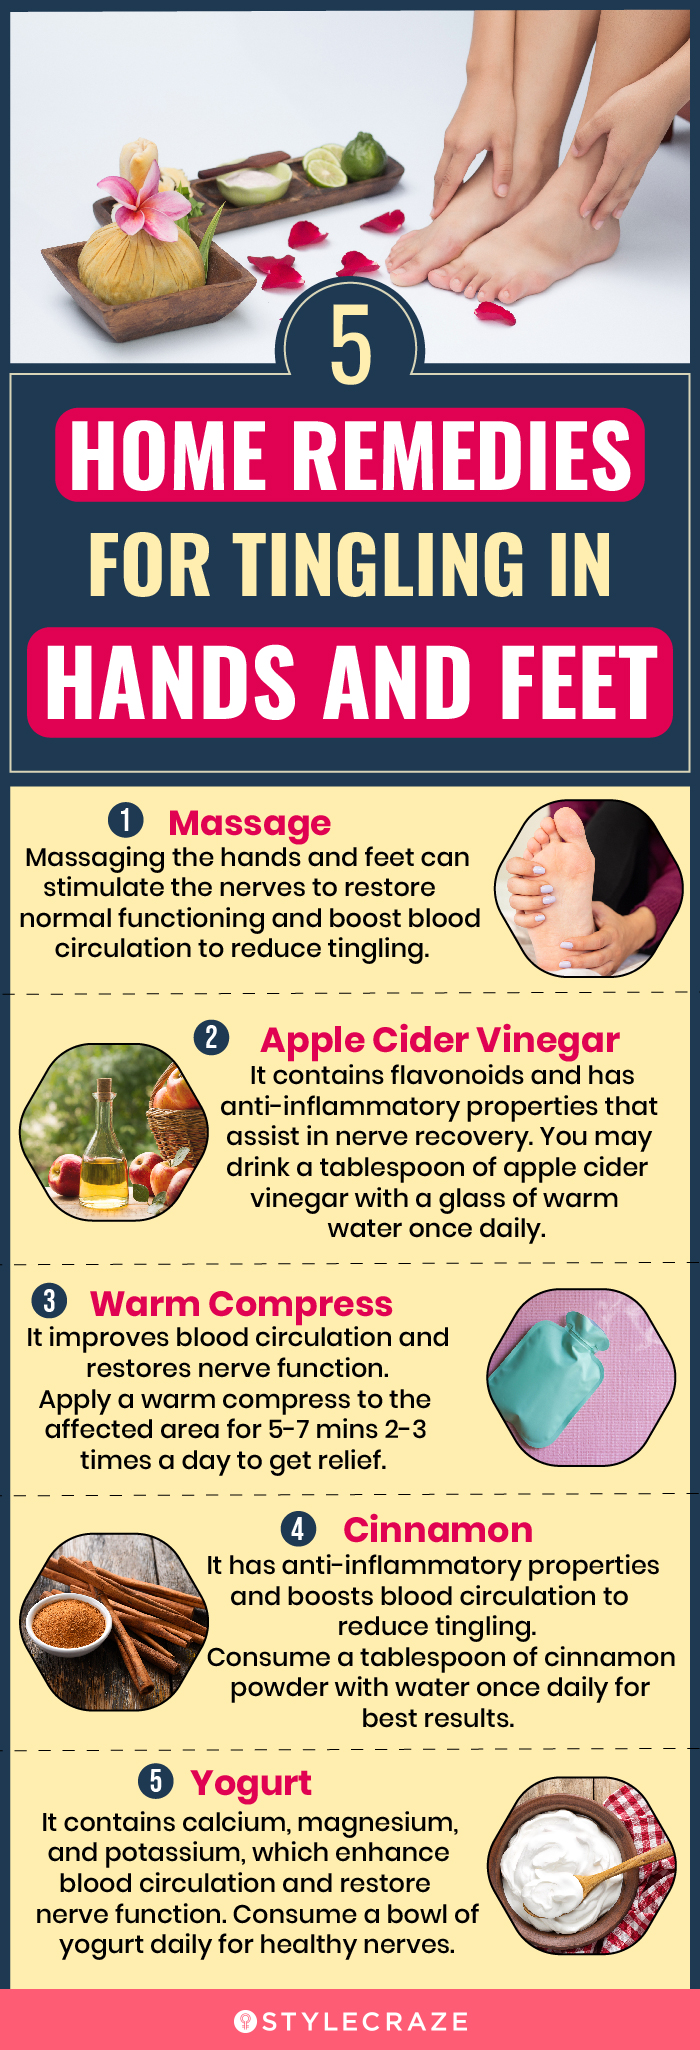 home remedies for tingling in hand and feet (infographic)